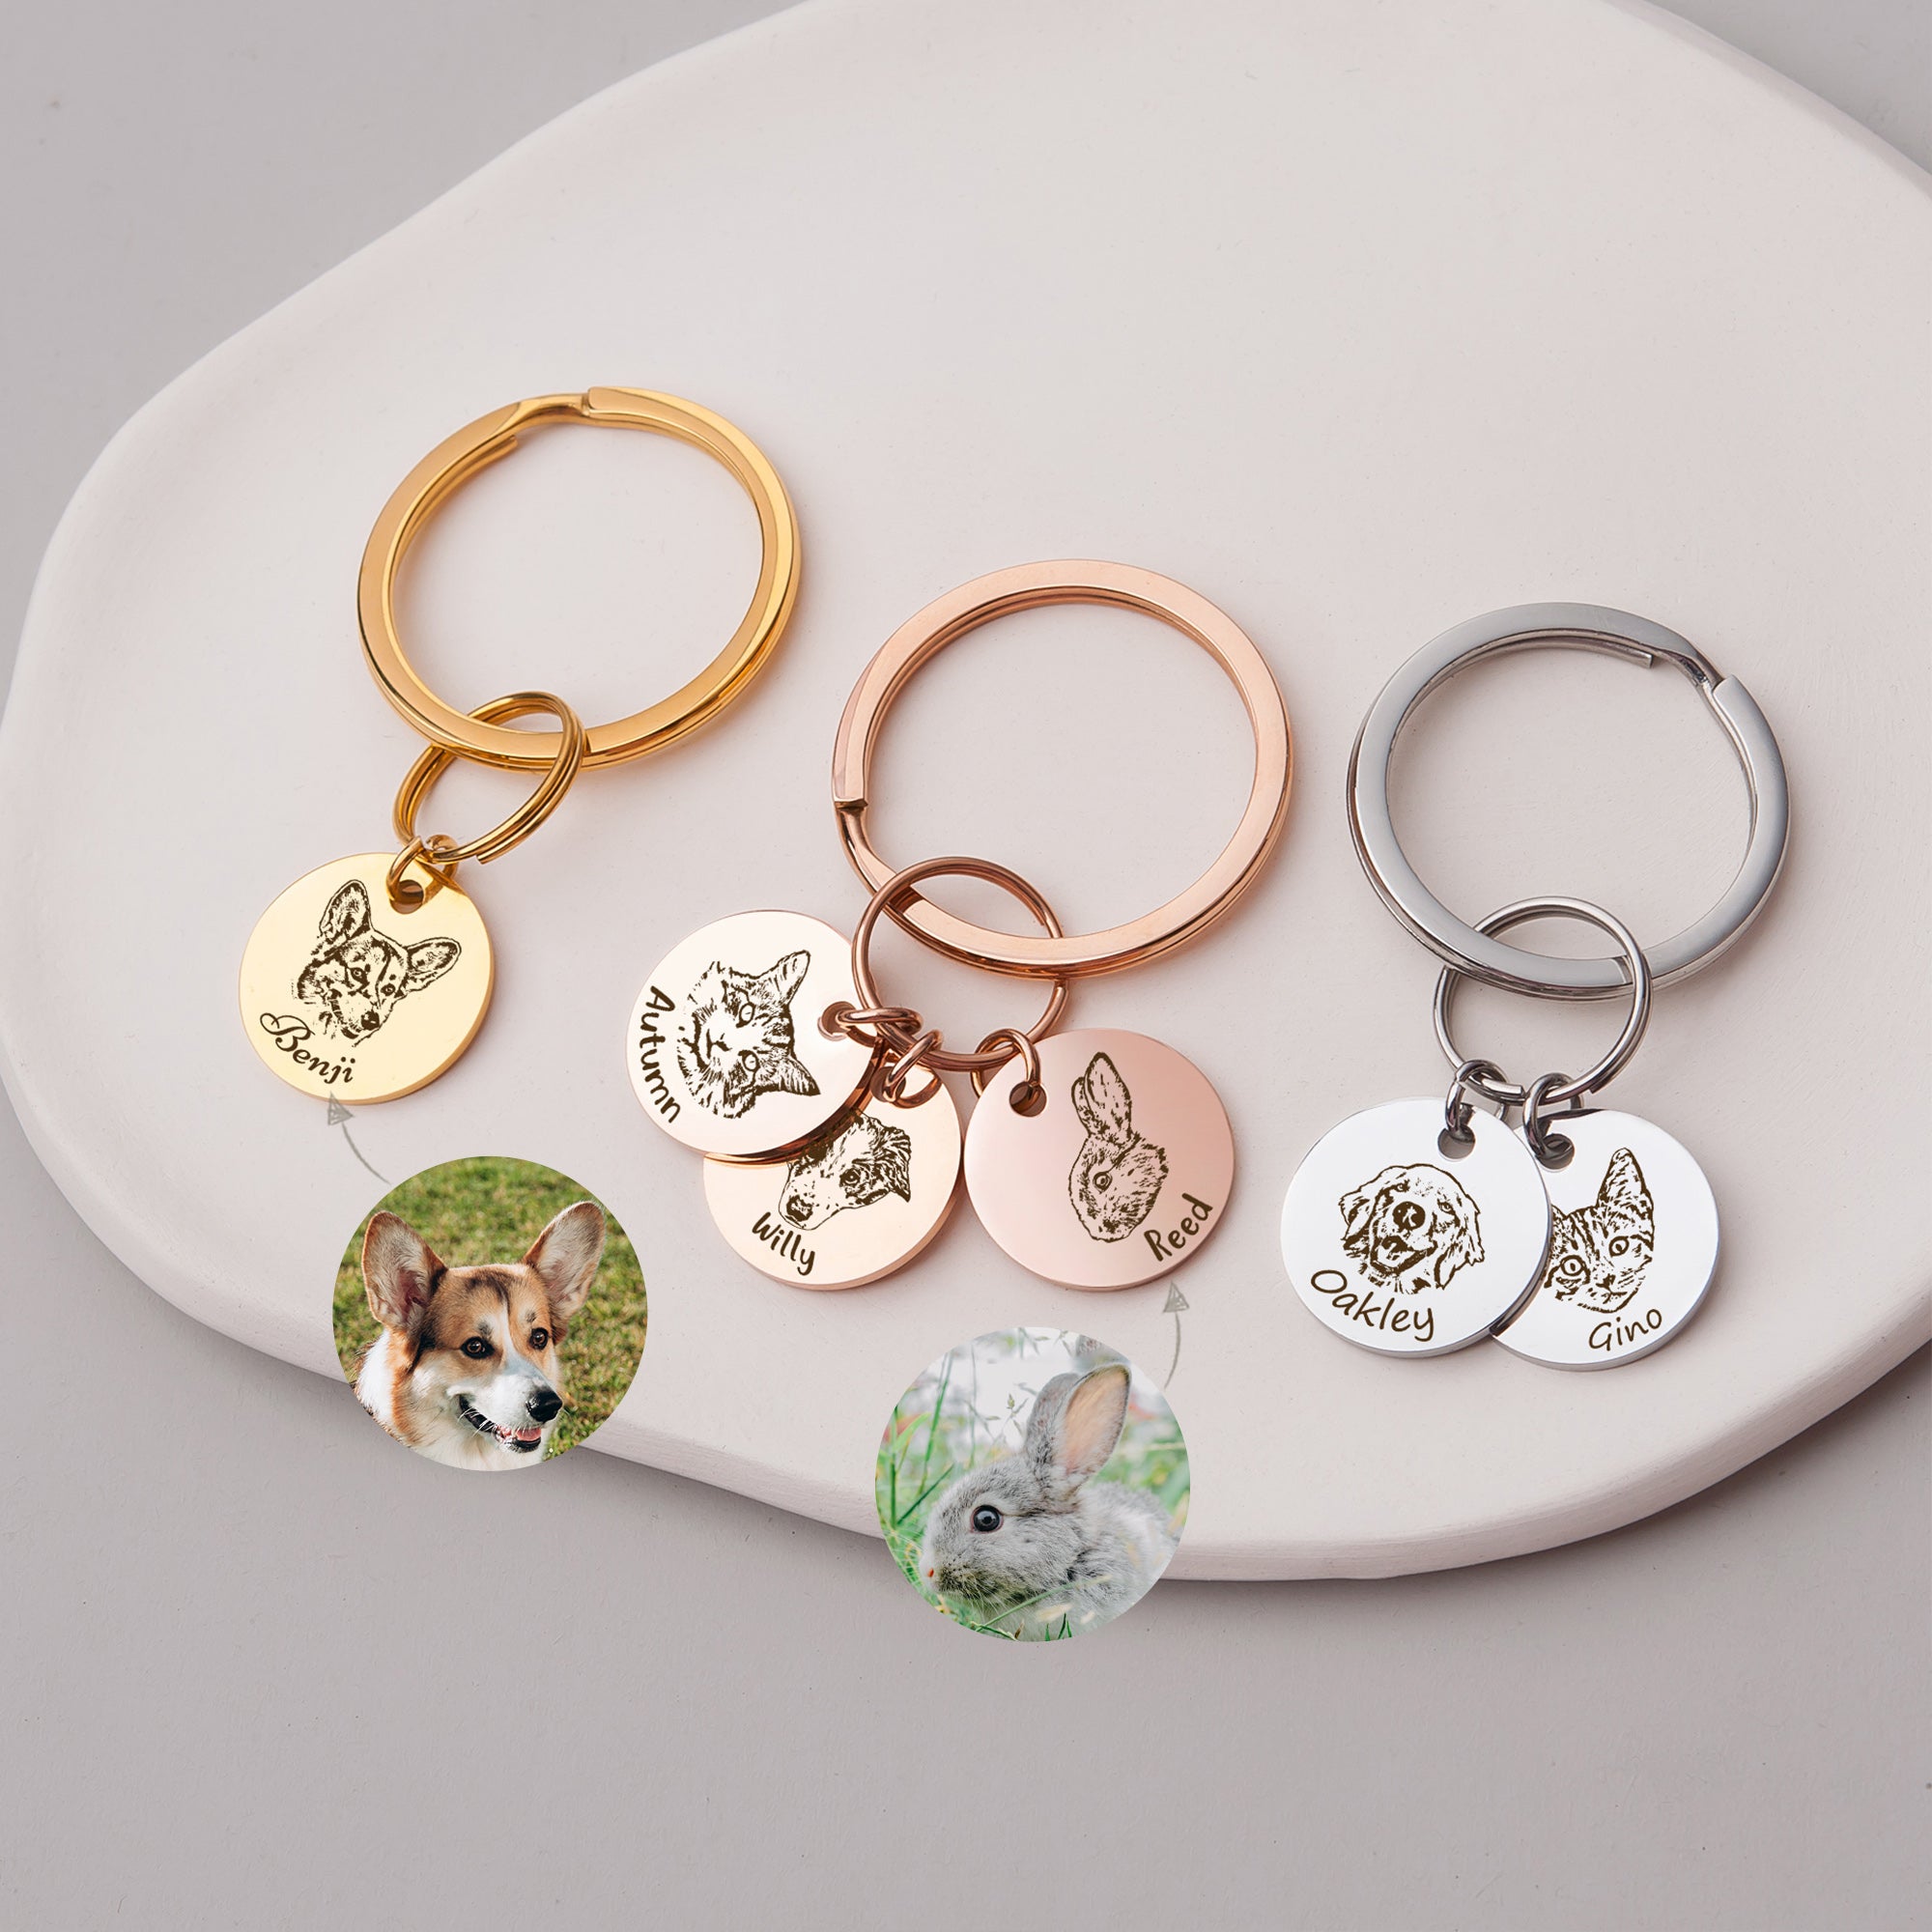 Personalized Pet Shaped Keychain as Memorial Gift for Loss of Pet